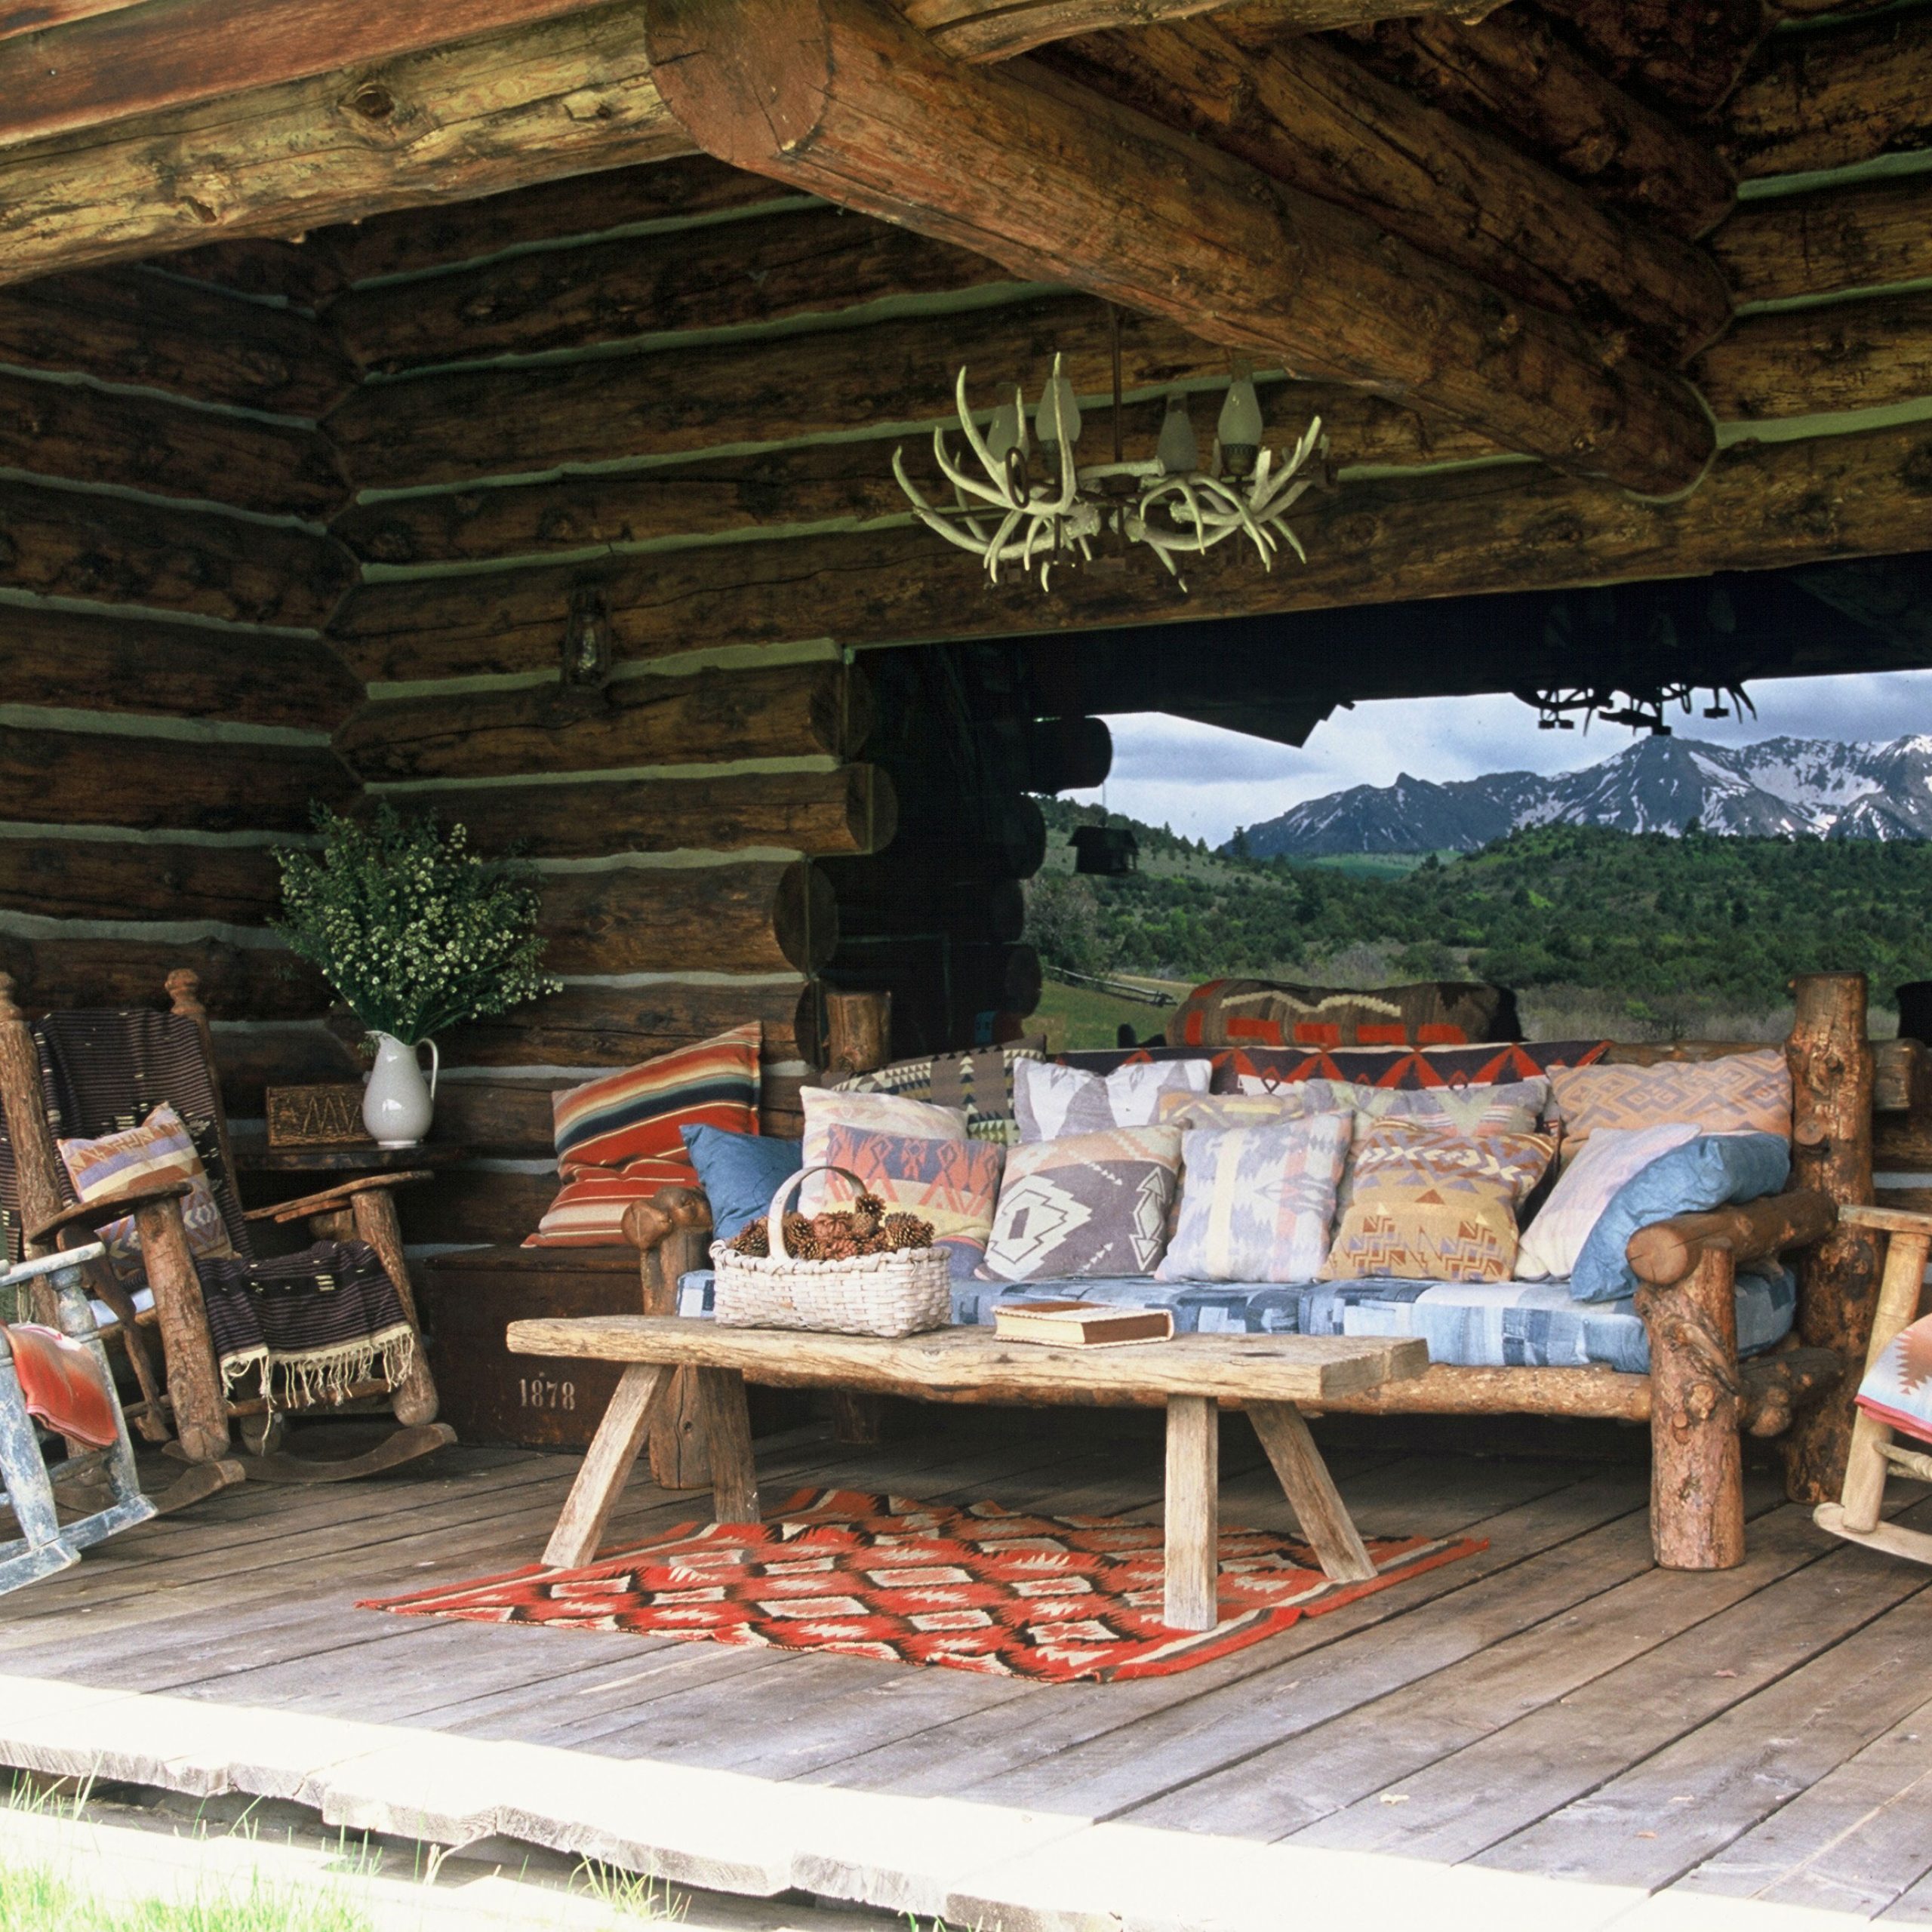 Deck-couch-&-chairs - Cowboys and Indians Magazine